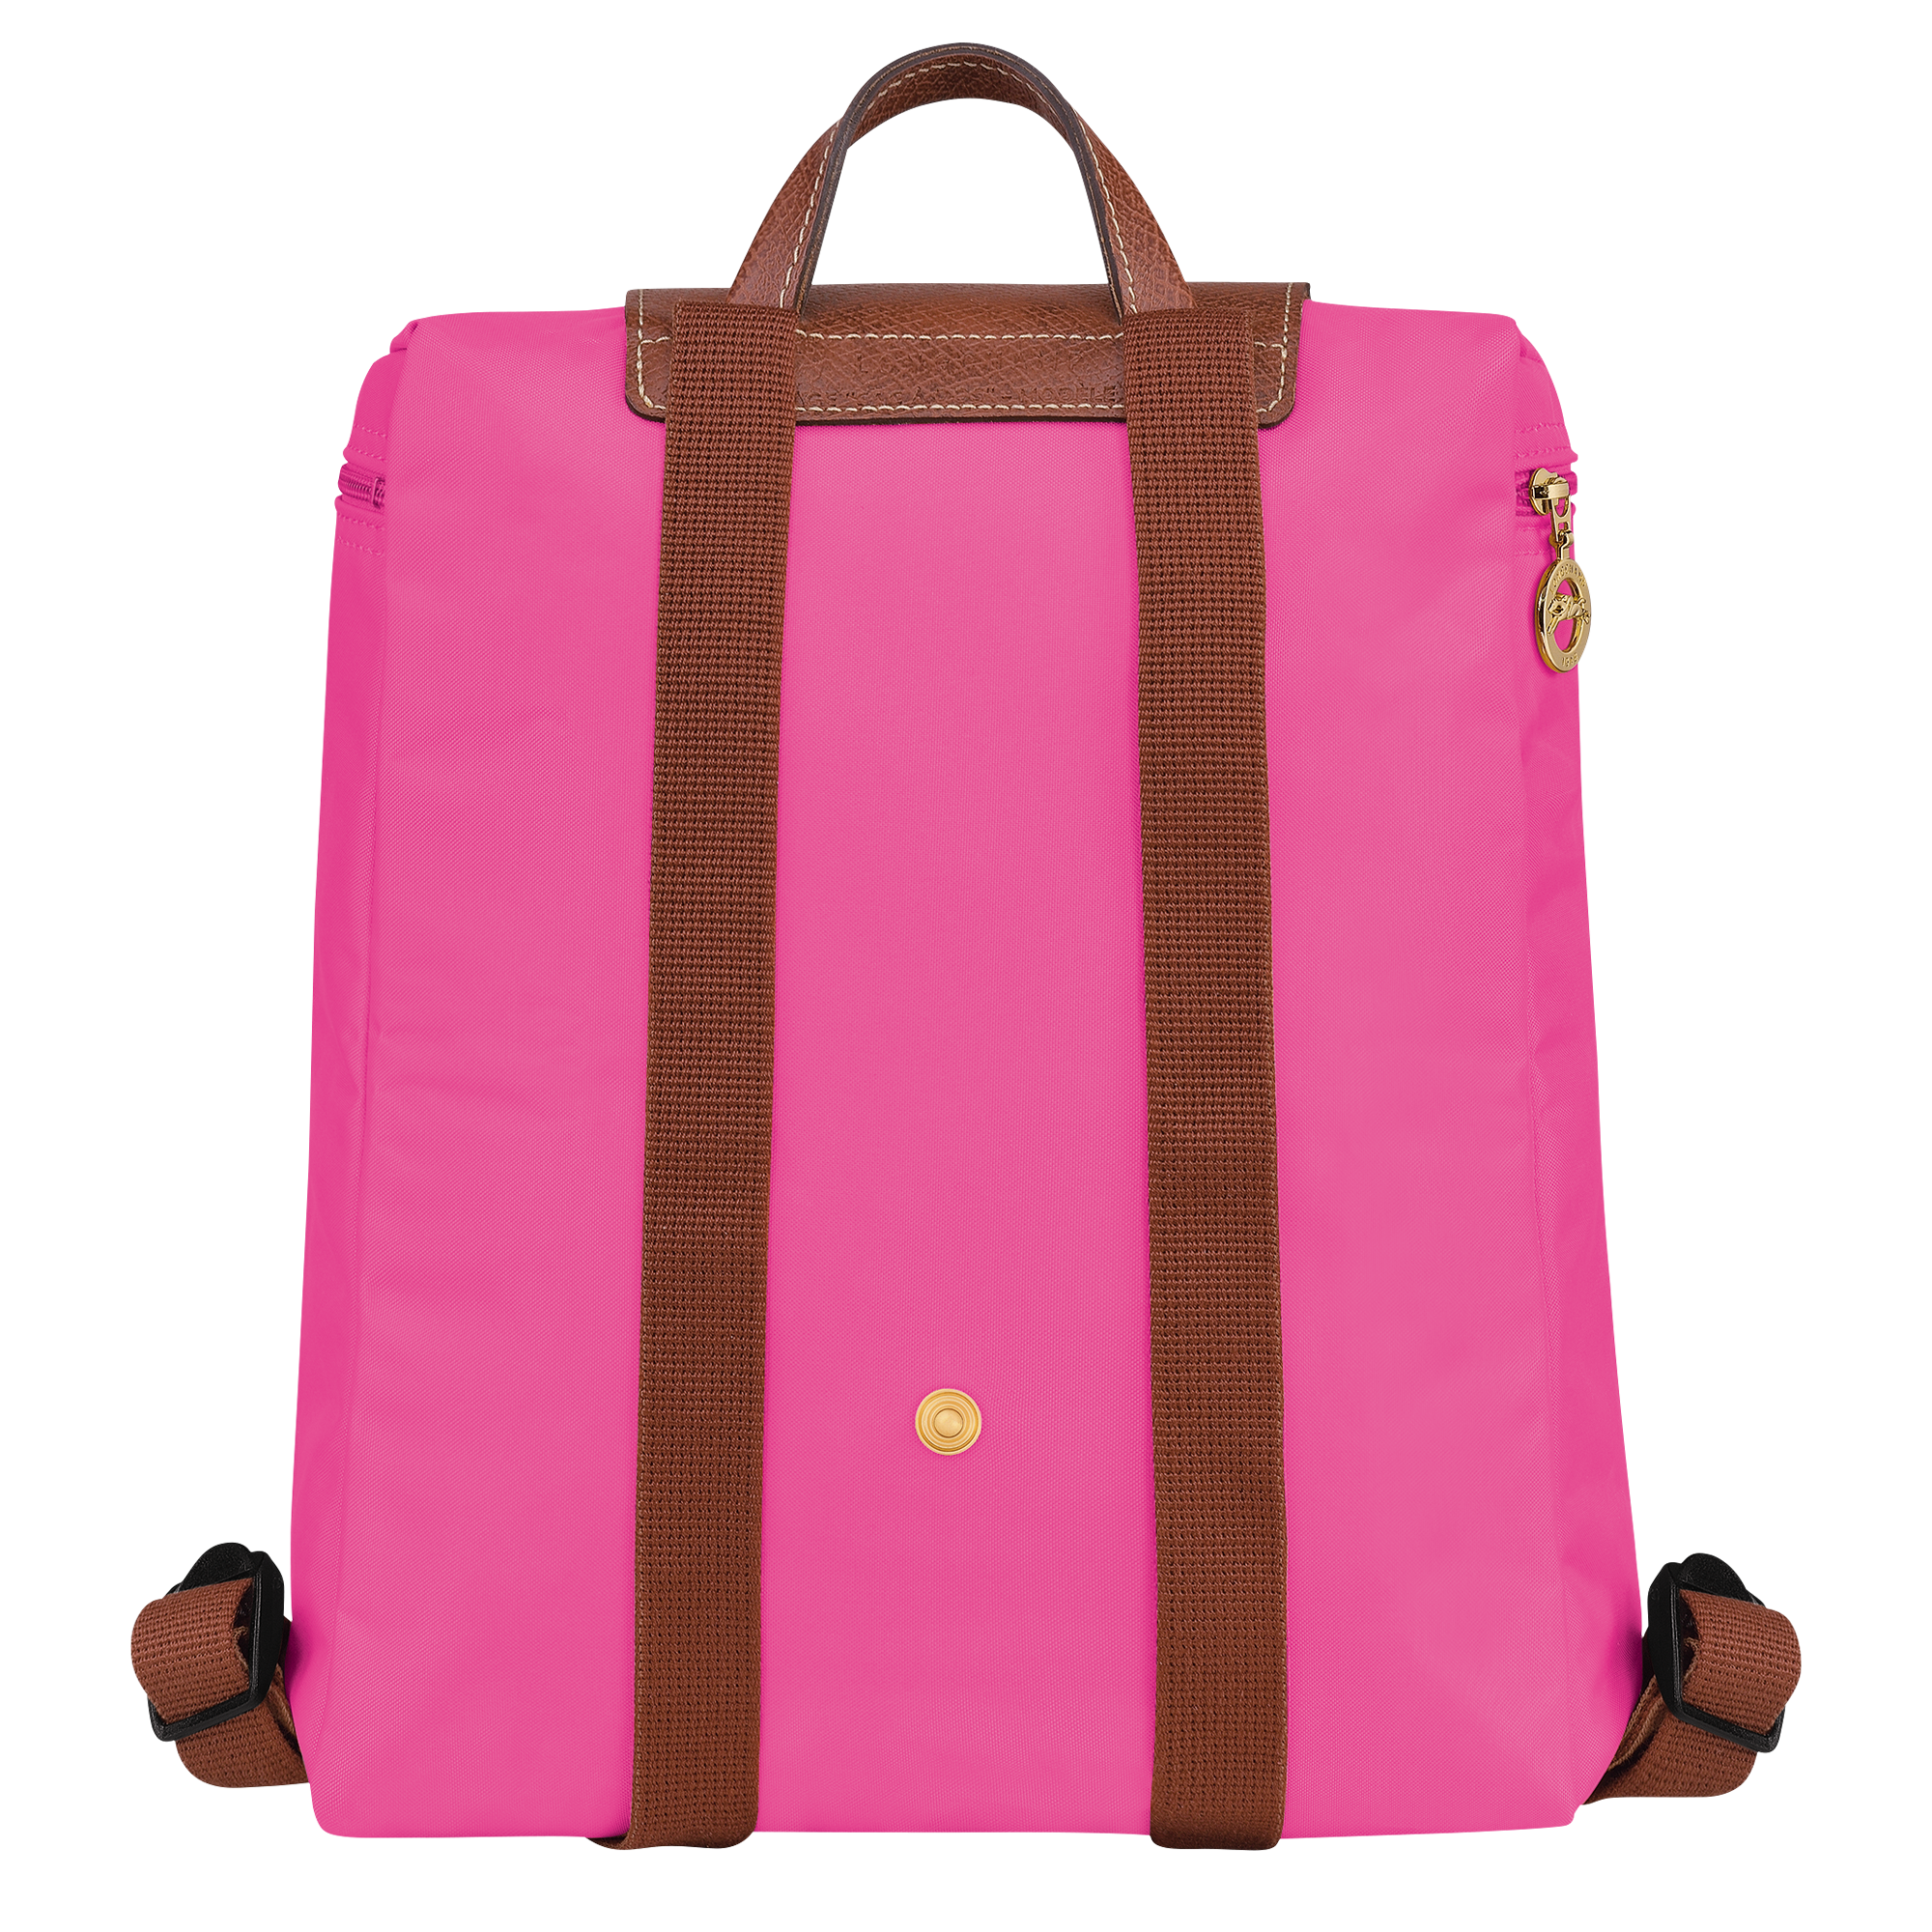 Longchamp LE PLIAGE ORIGINAL - Backpack in Candy - 3 (SKU: L1699089P73)